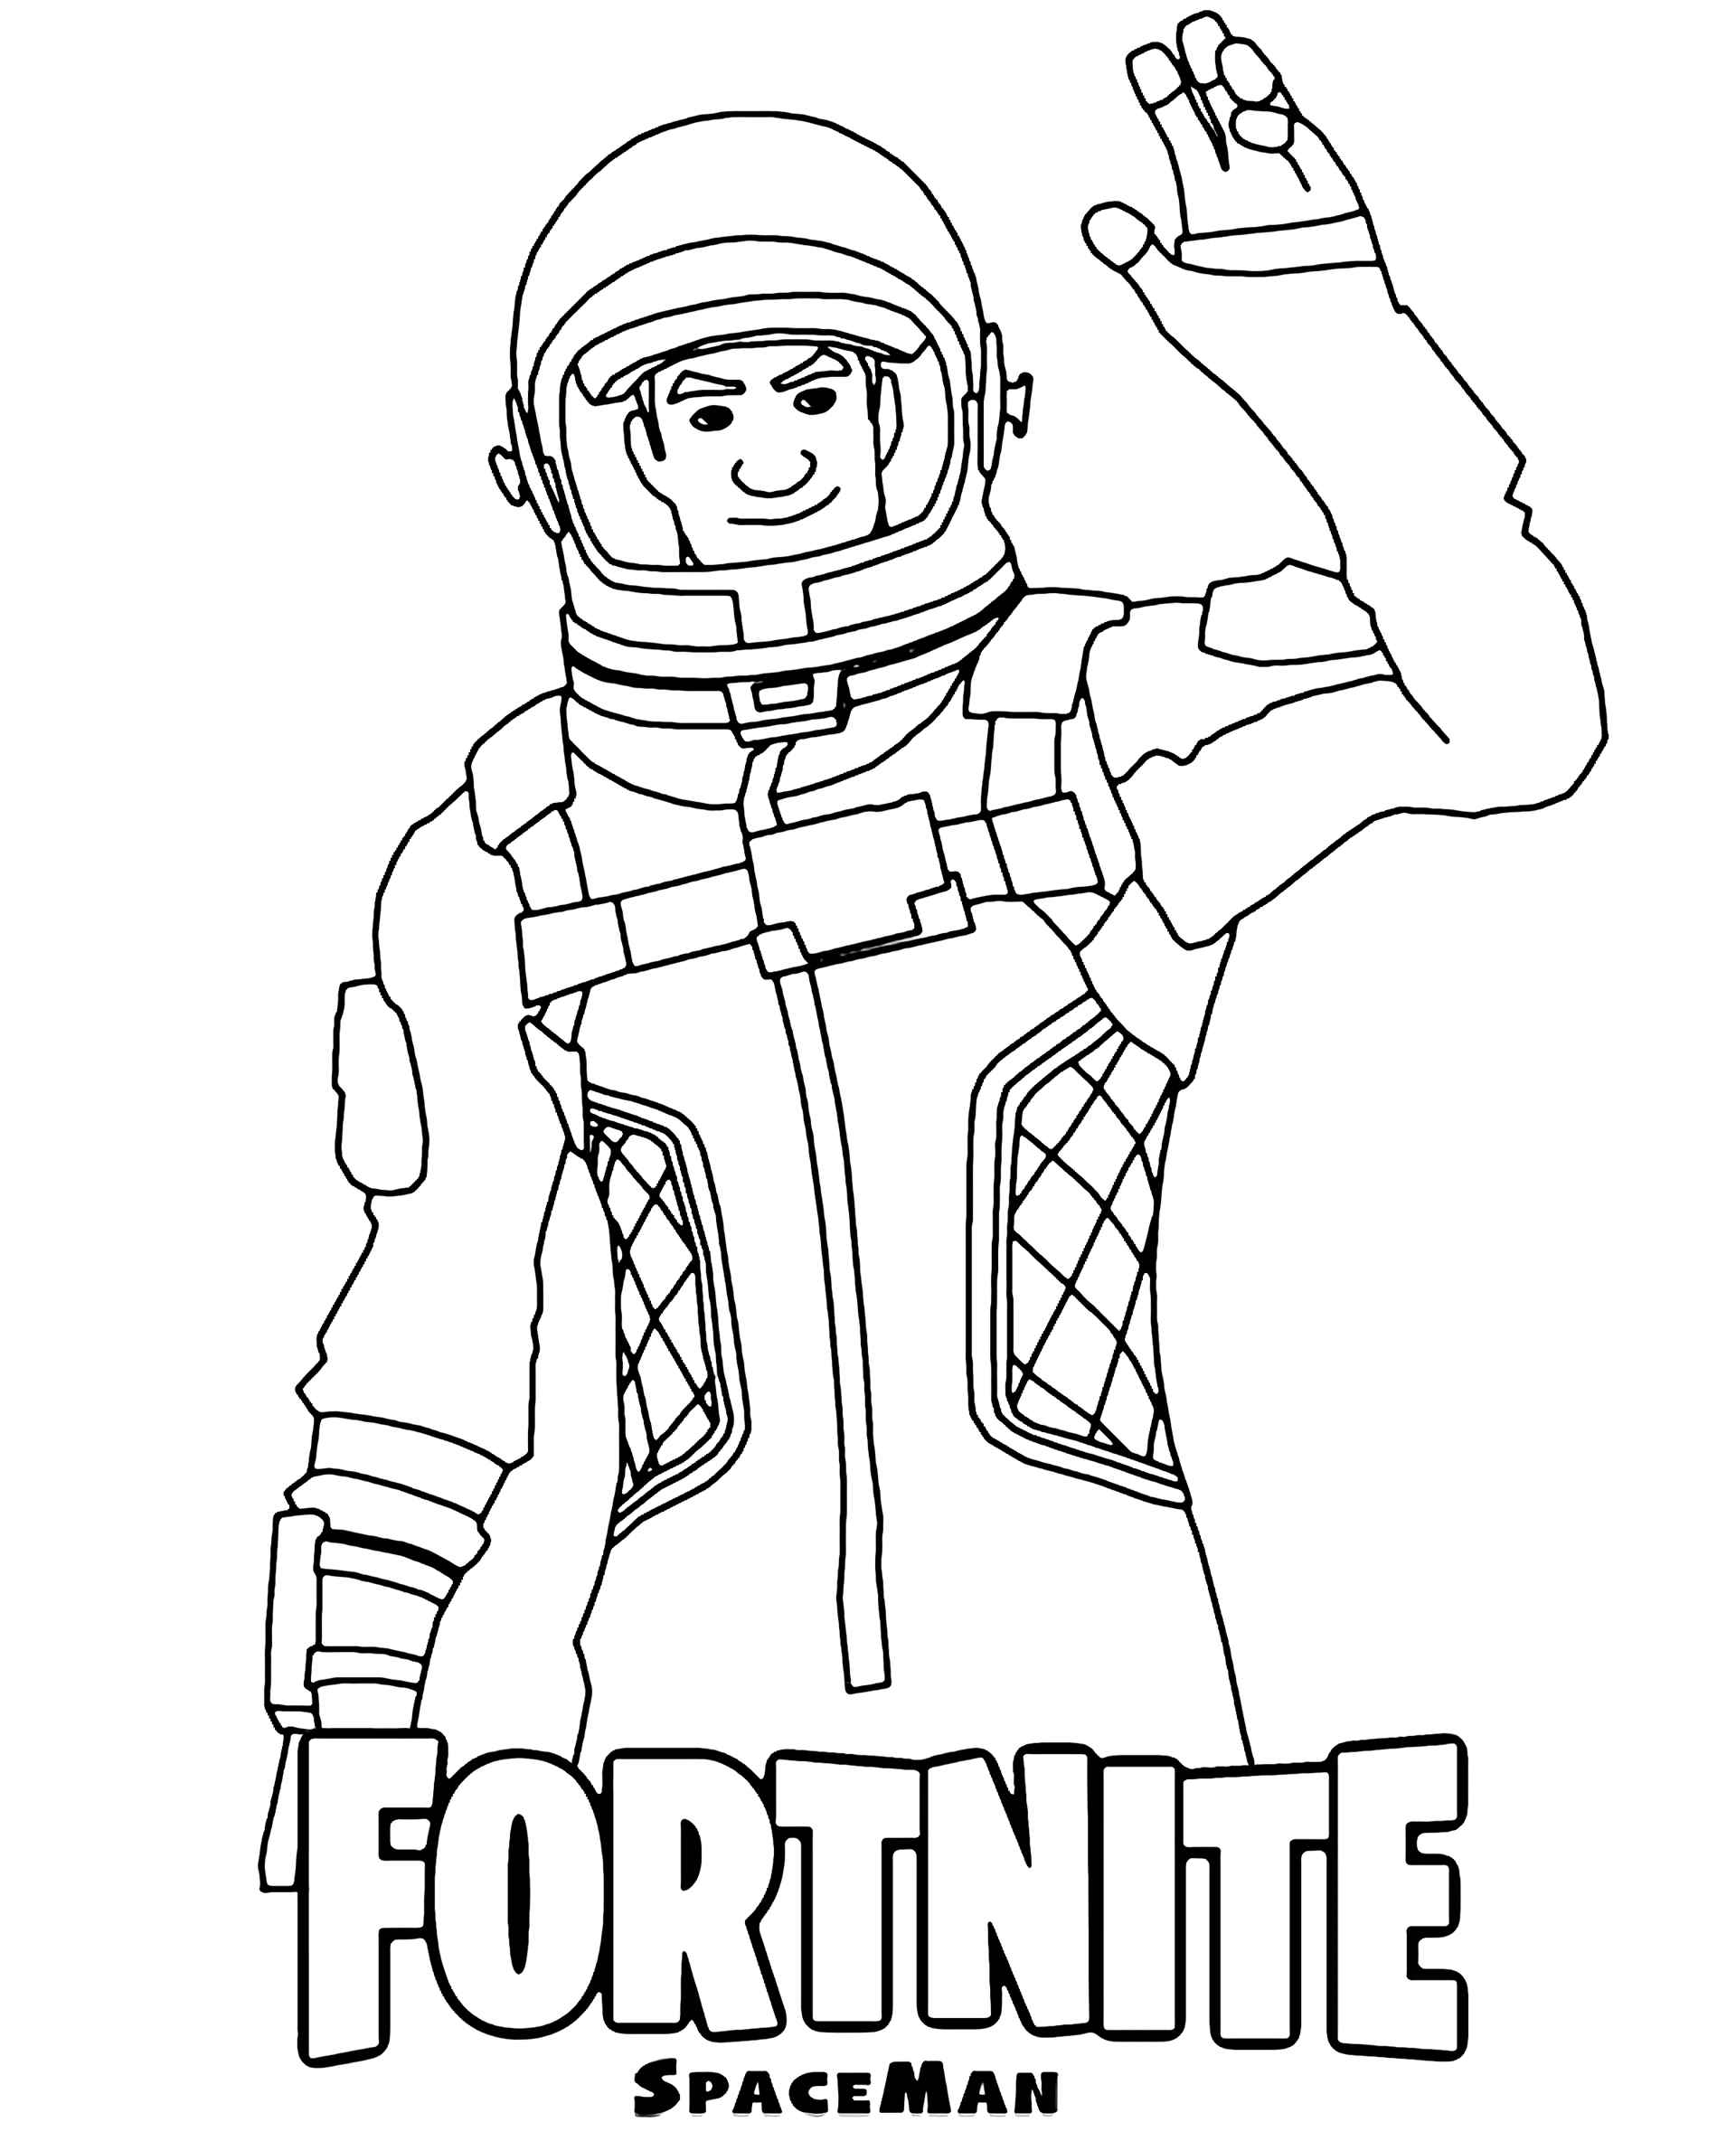 Coloring Page Spaceman Greets You In Fortnite to Print and Download